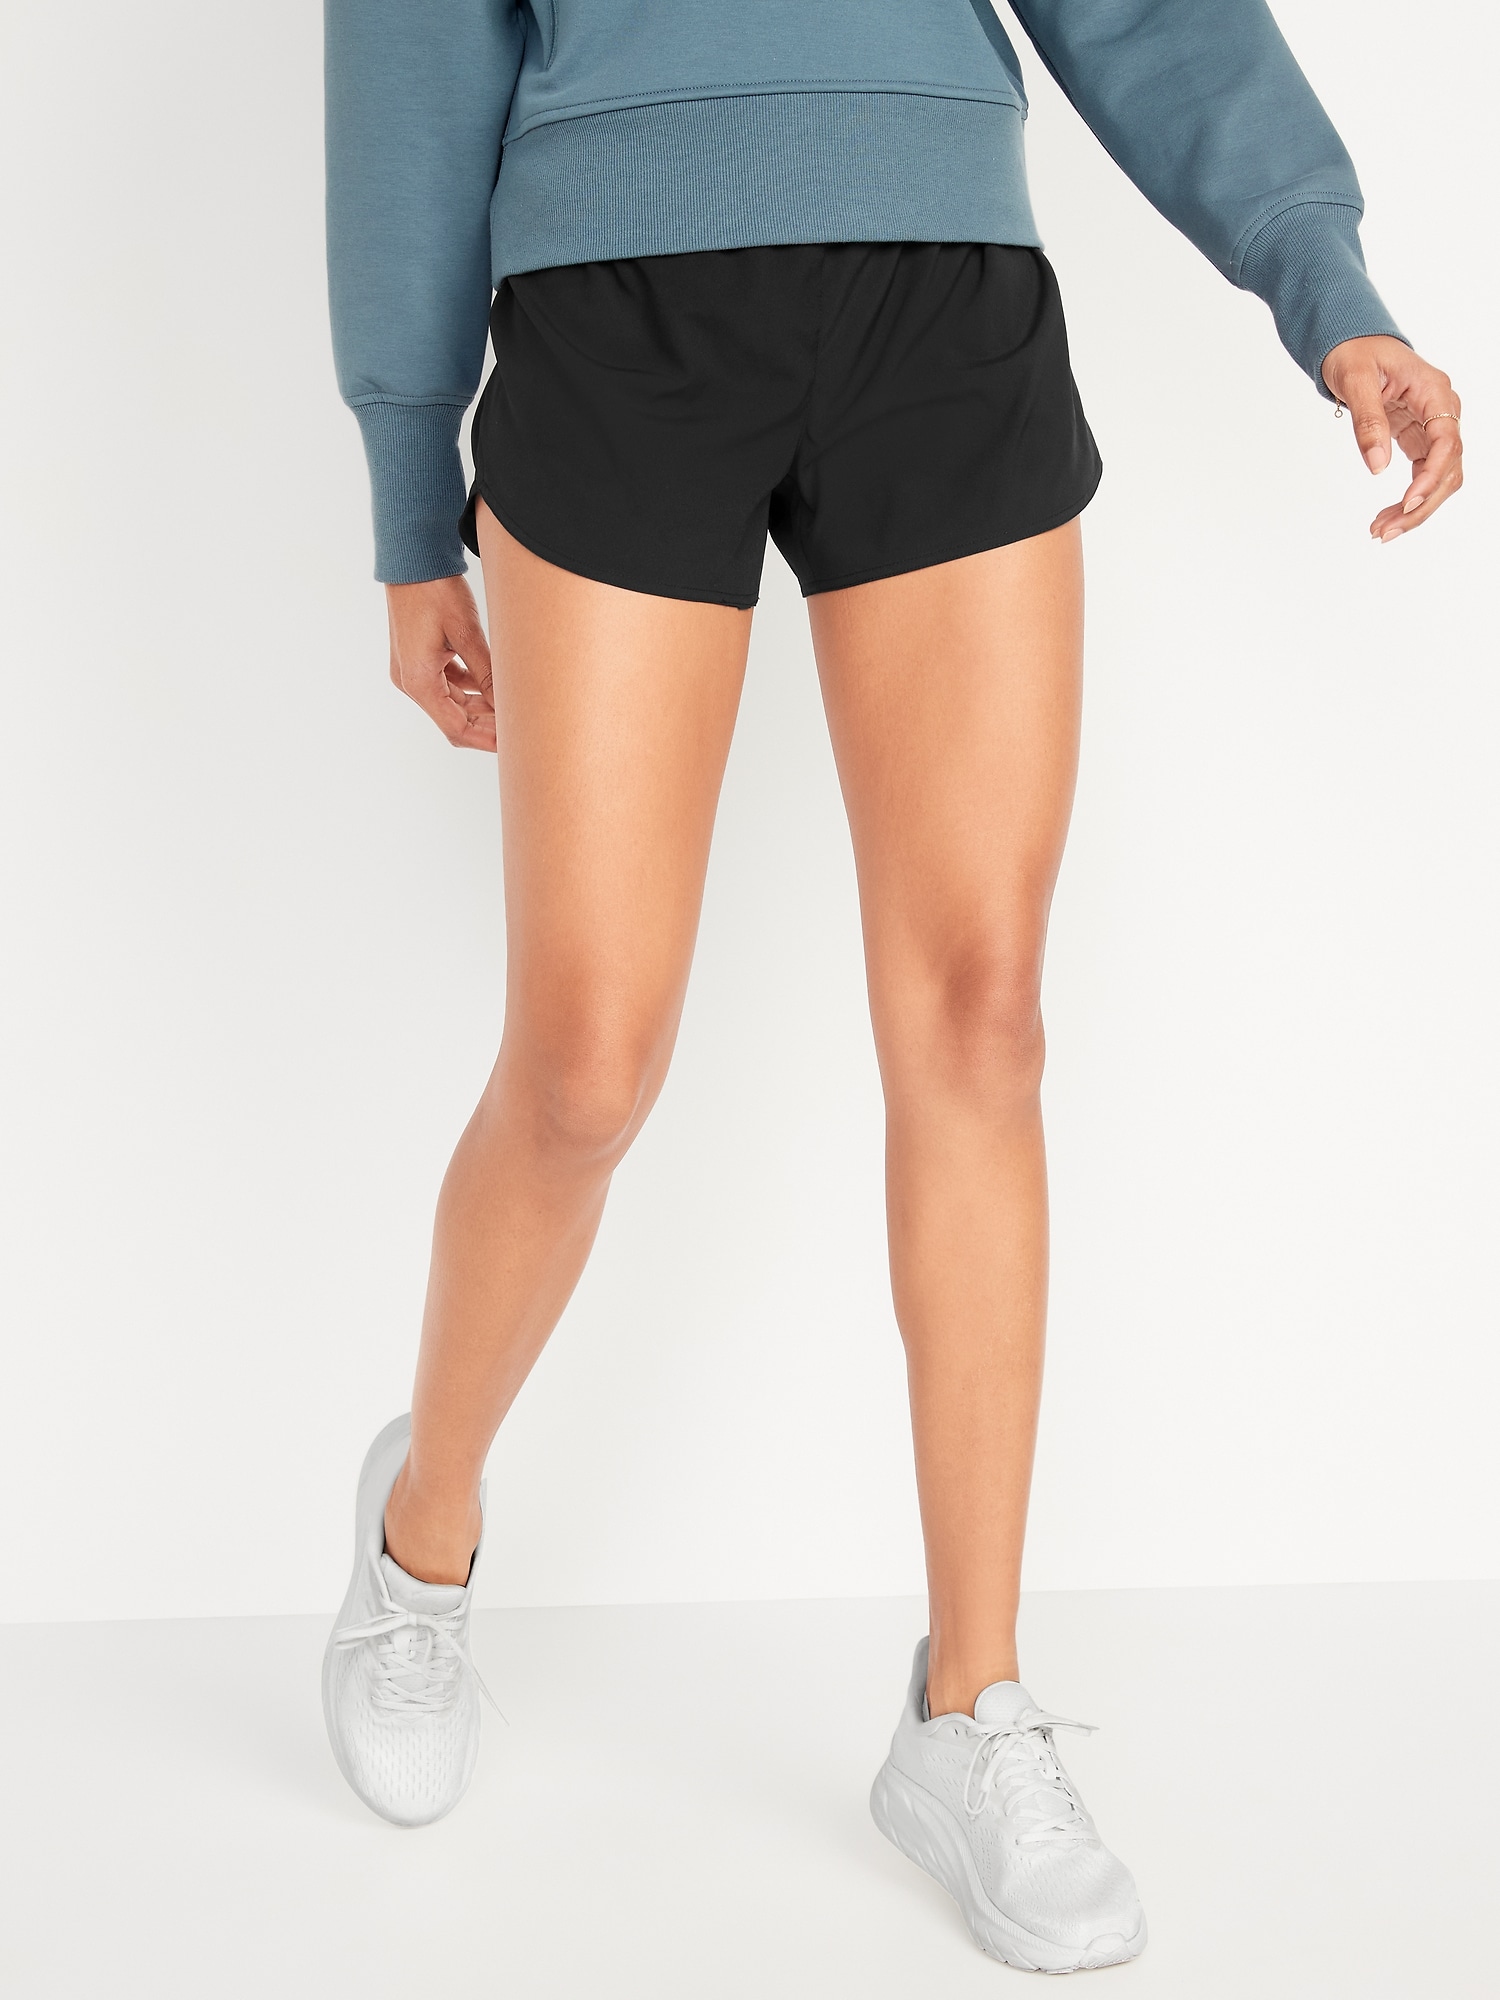 Haley Shorts - Mid Length For Dance Class or Convention – Second